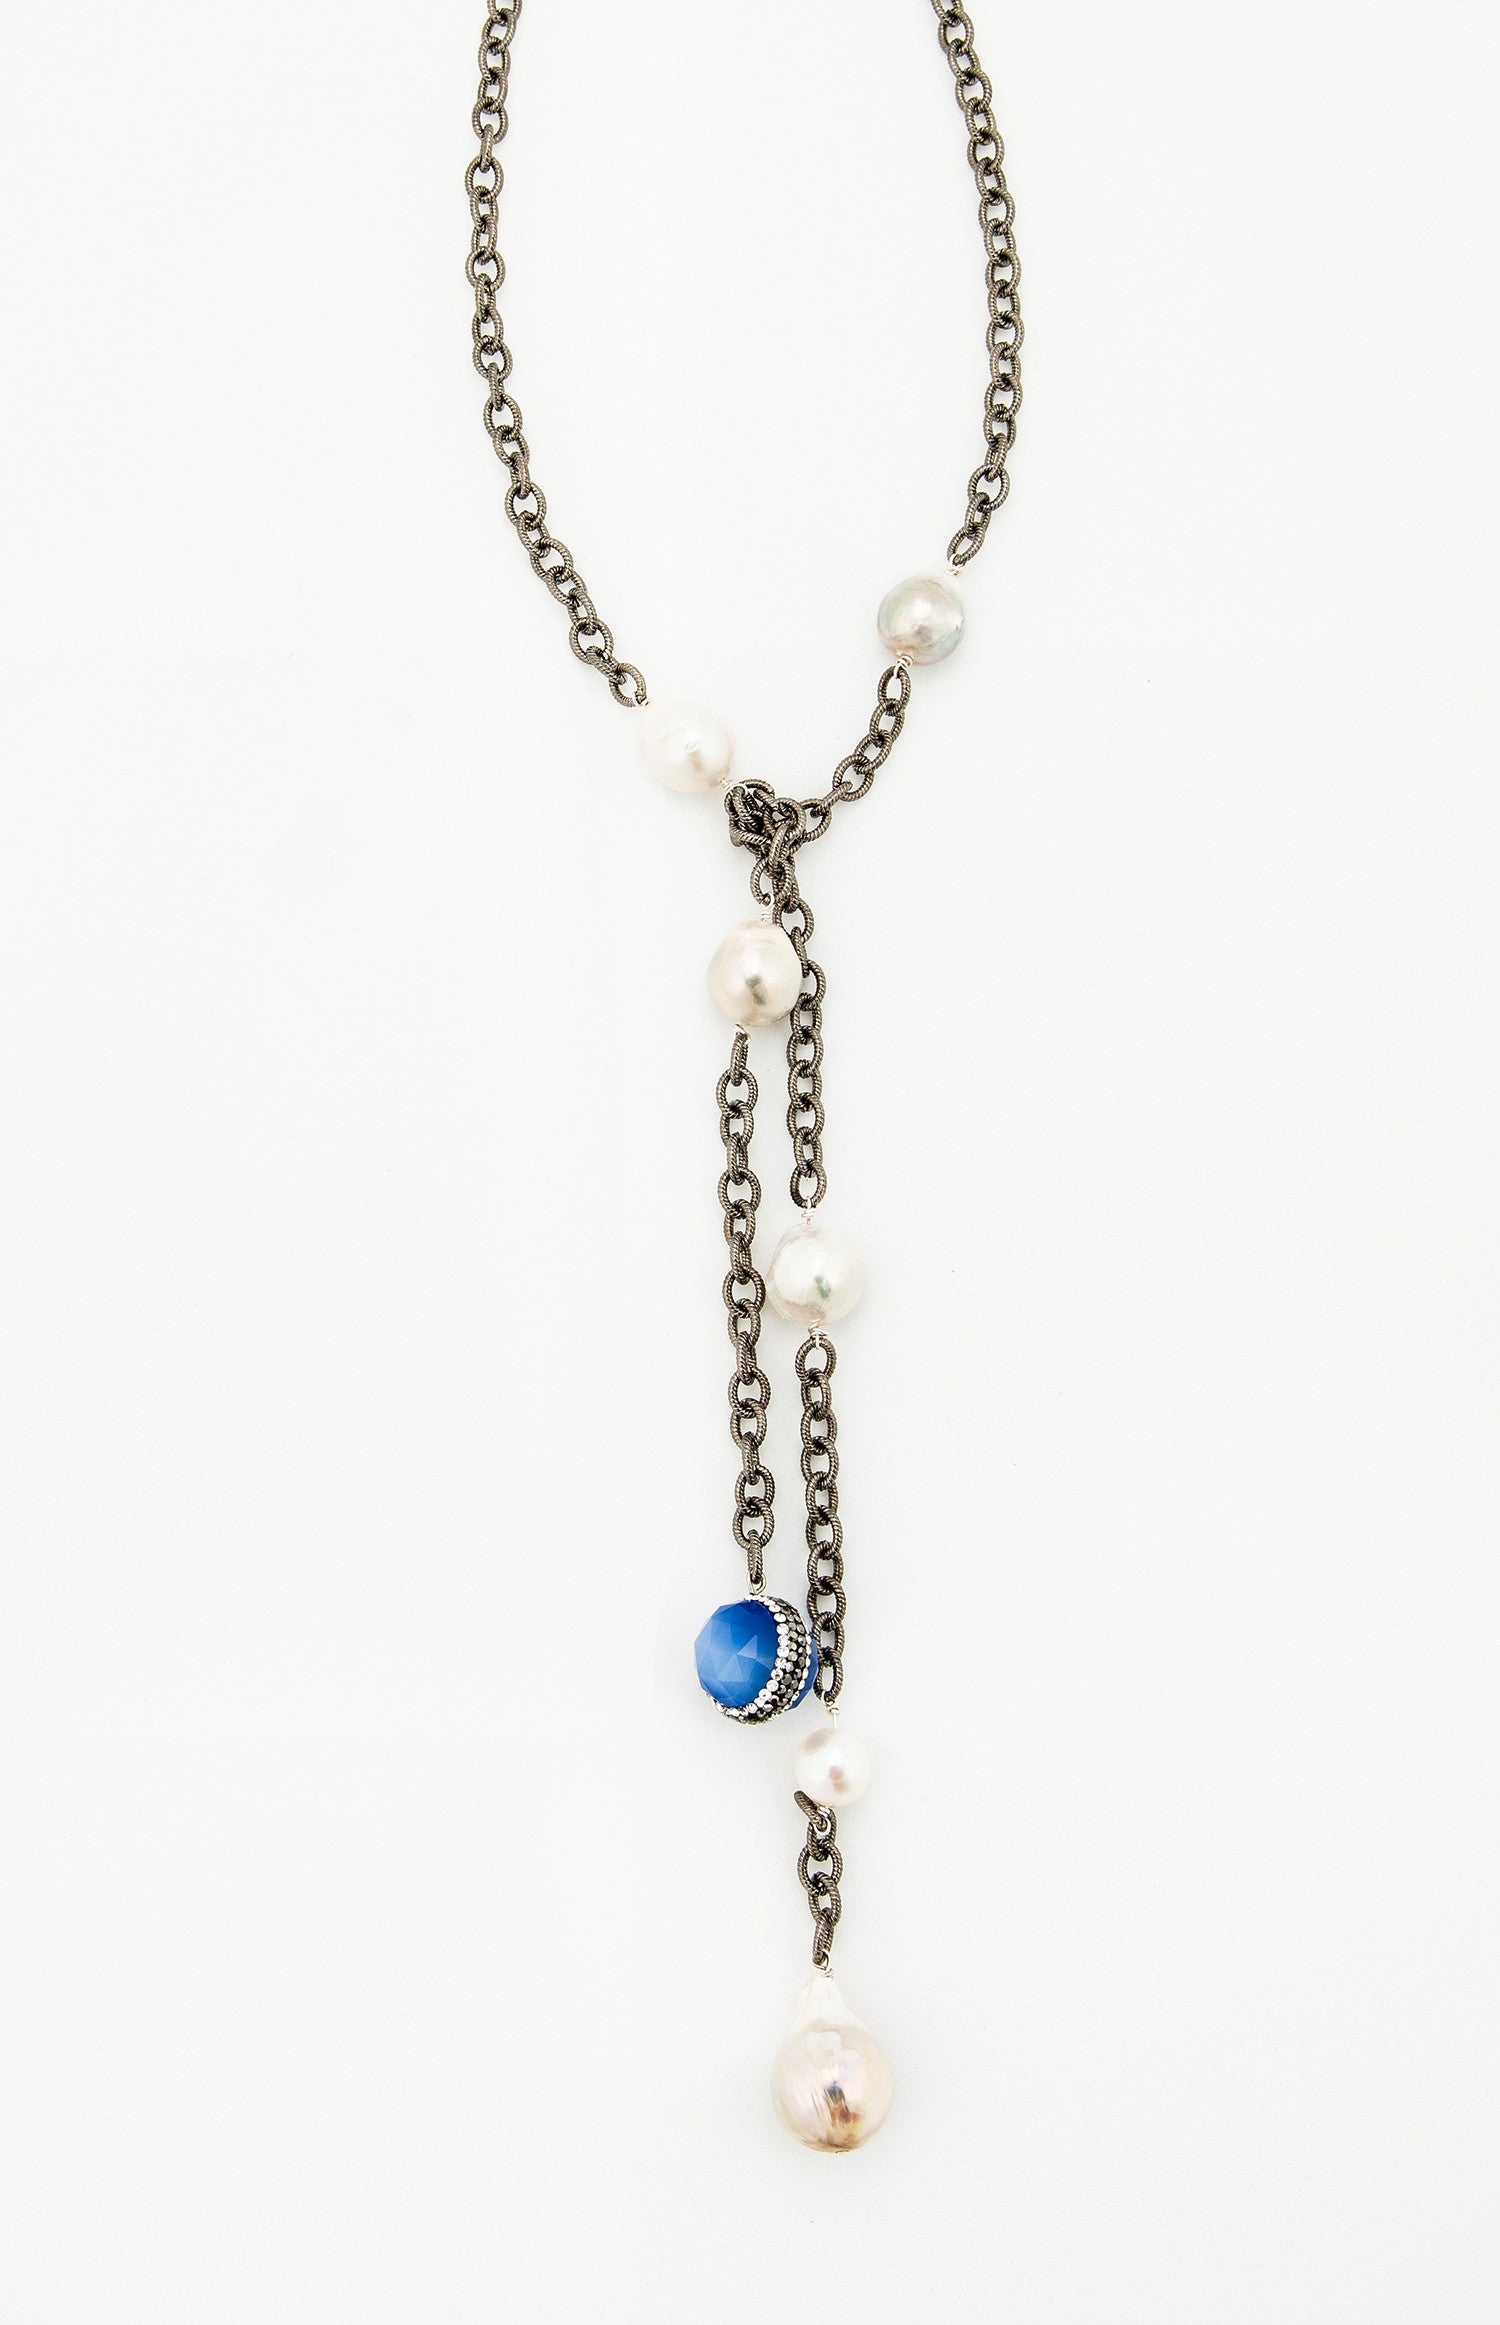 Rhodium Chain with White Baroque Pearls and Blue Agate